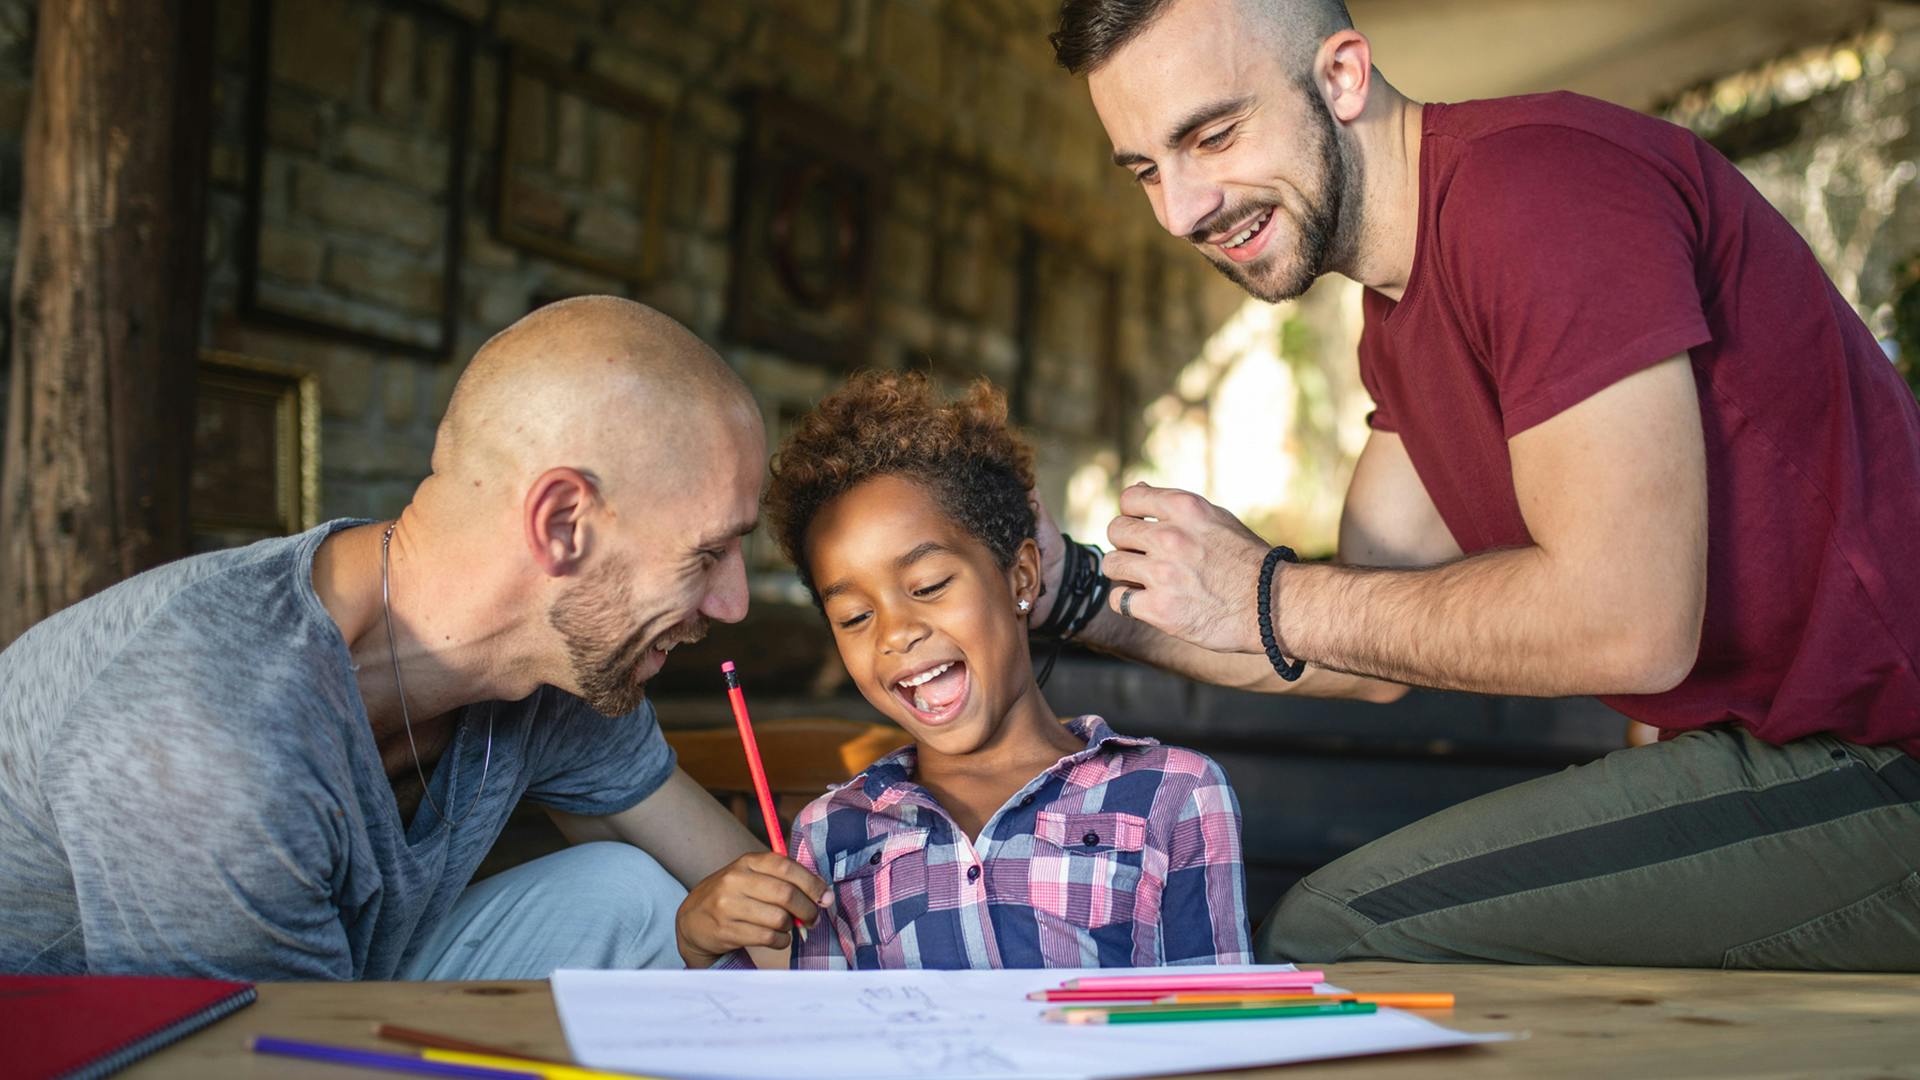 Two fathers and a young girl who is laughing work on completing a homework assignment at the table. 